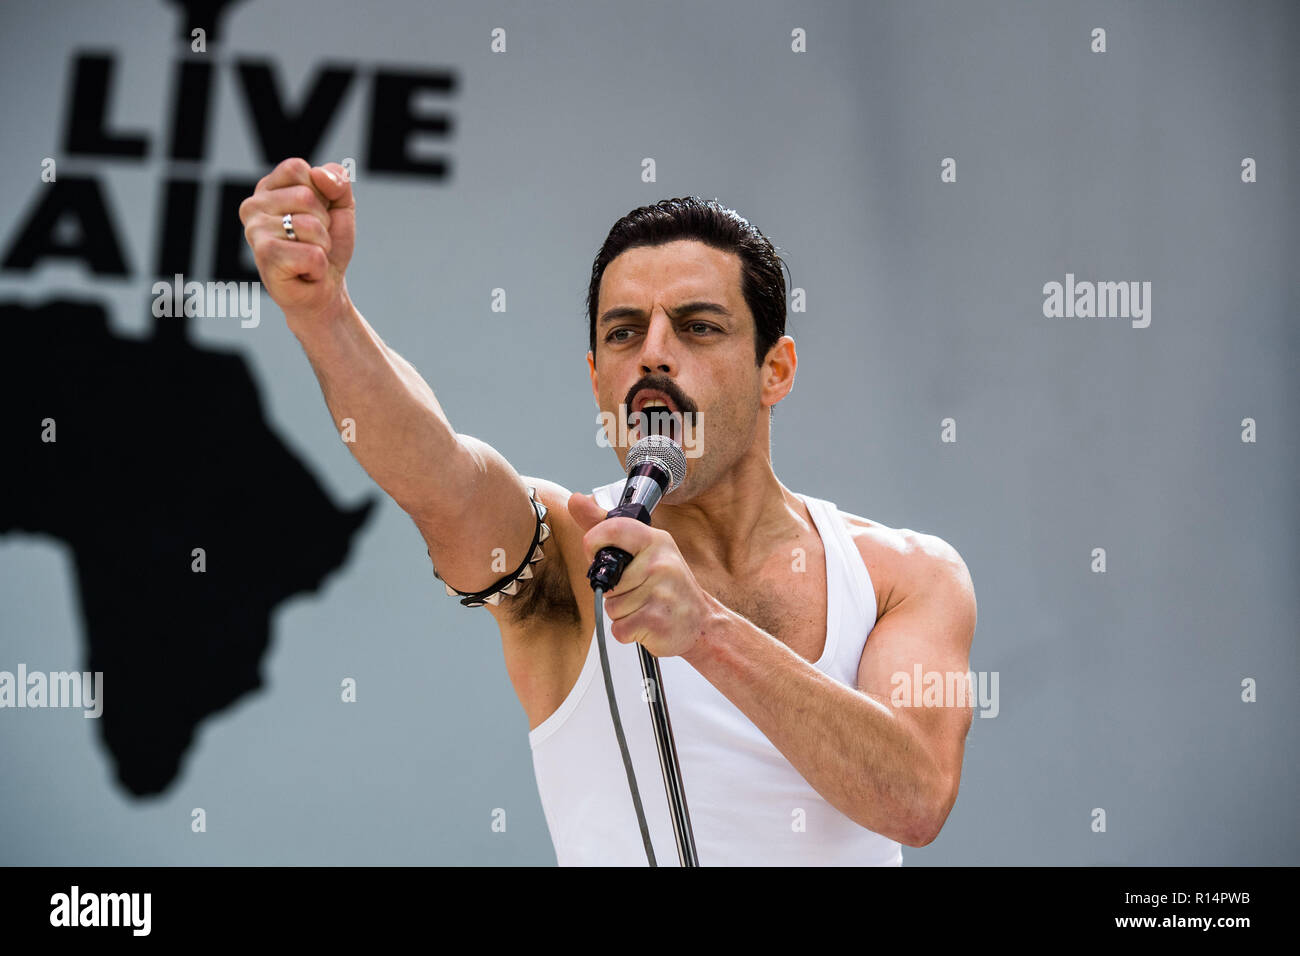 RELEASE DATE: November 2, 2018 TITLE: Bohemian Rhapsody STUDIO: Twentieth Century Fox DIRECTOR: Bryan Singer PLOT: The cast and producer of Bohemian Rhapsody share what it was like bringing the story of Freddie Mercury and Queen to the big screen. STARRING: RAMI MALEK as Freddie Mercury. (Credit Image: © Twentieth Century Fox/Entertainment Pictures) Stock Photo